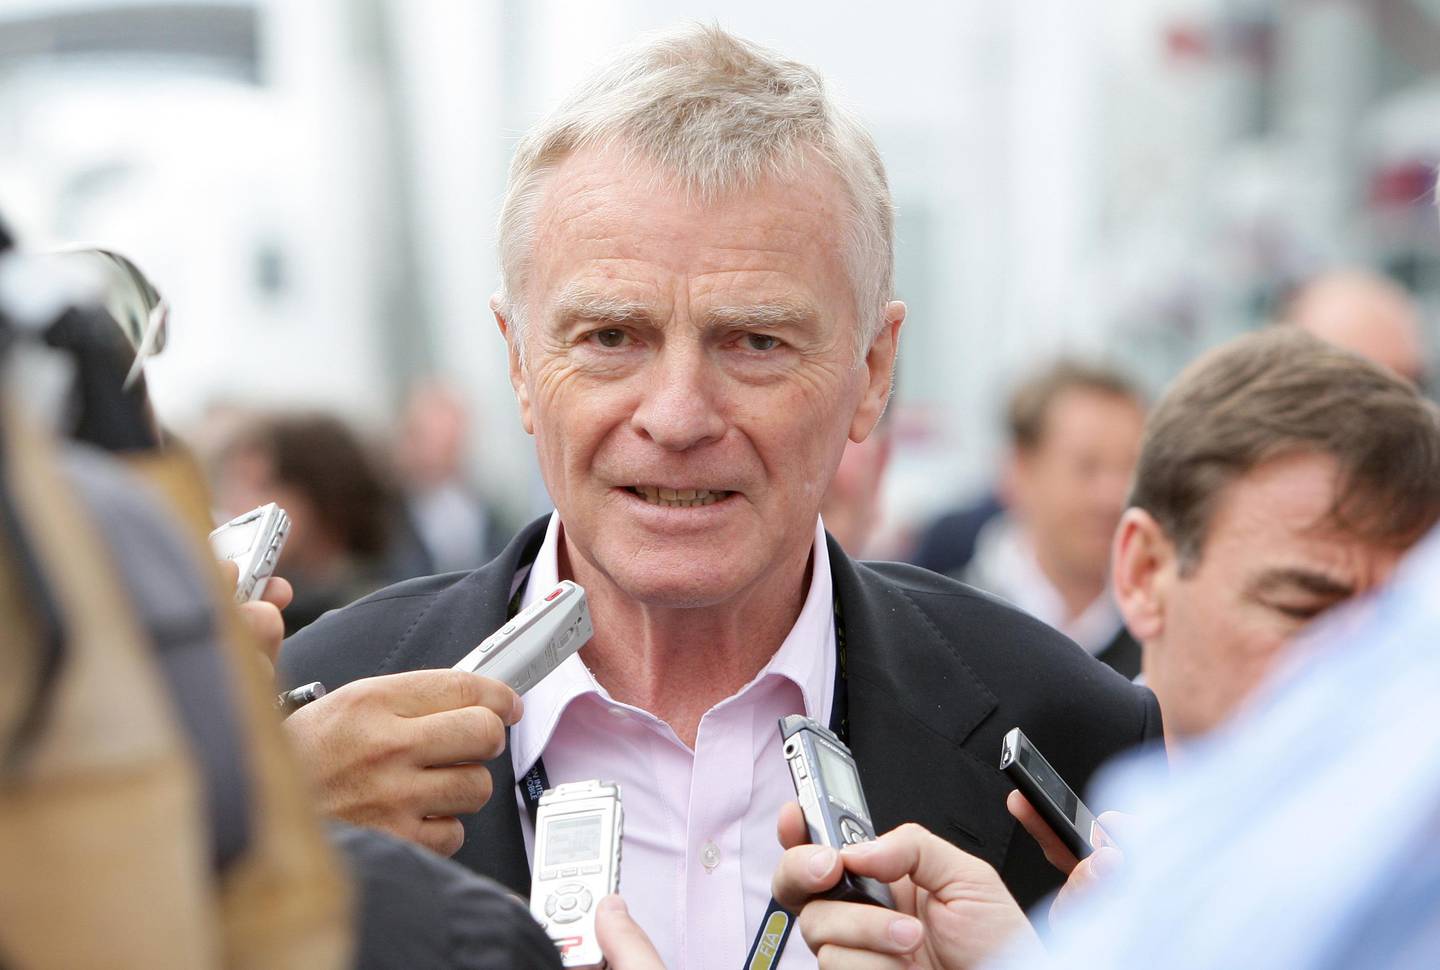 Max Mosley was a racing driver and president of the Federation Internationale de l'Automobile. PA Wire